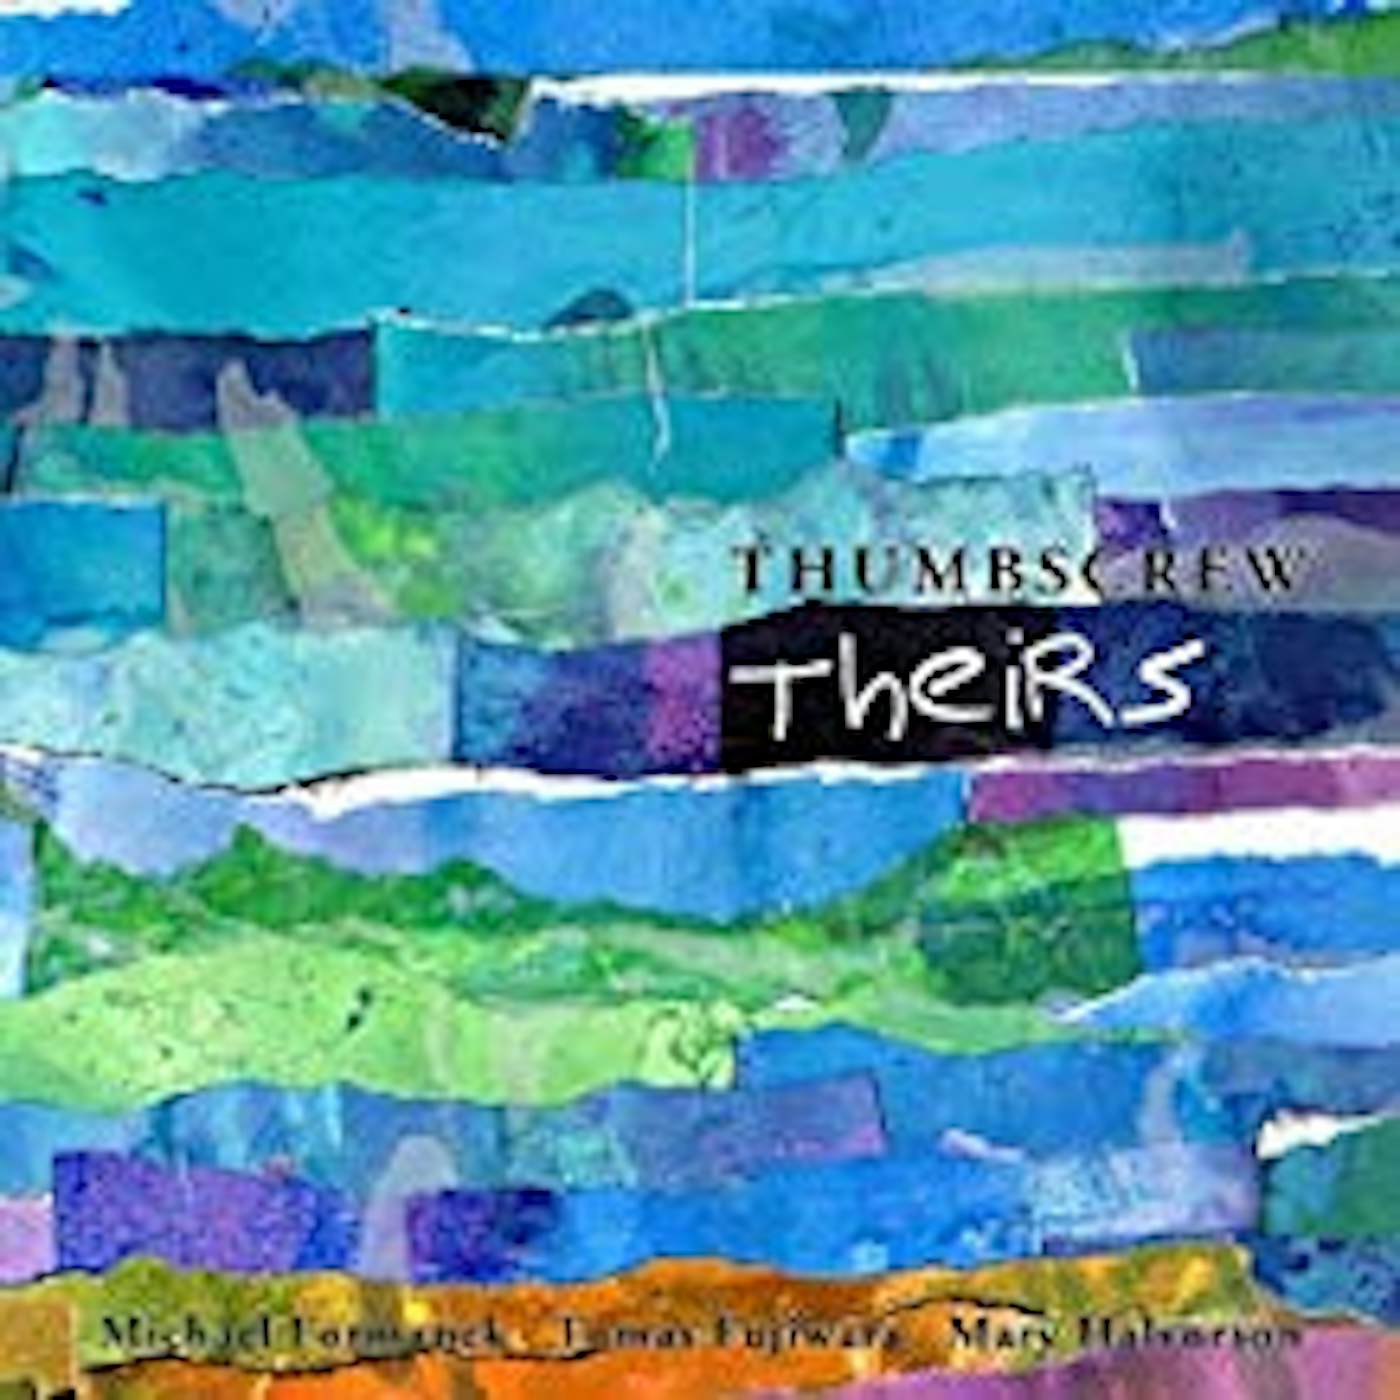 Thumbscrew Theirs CD